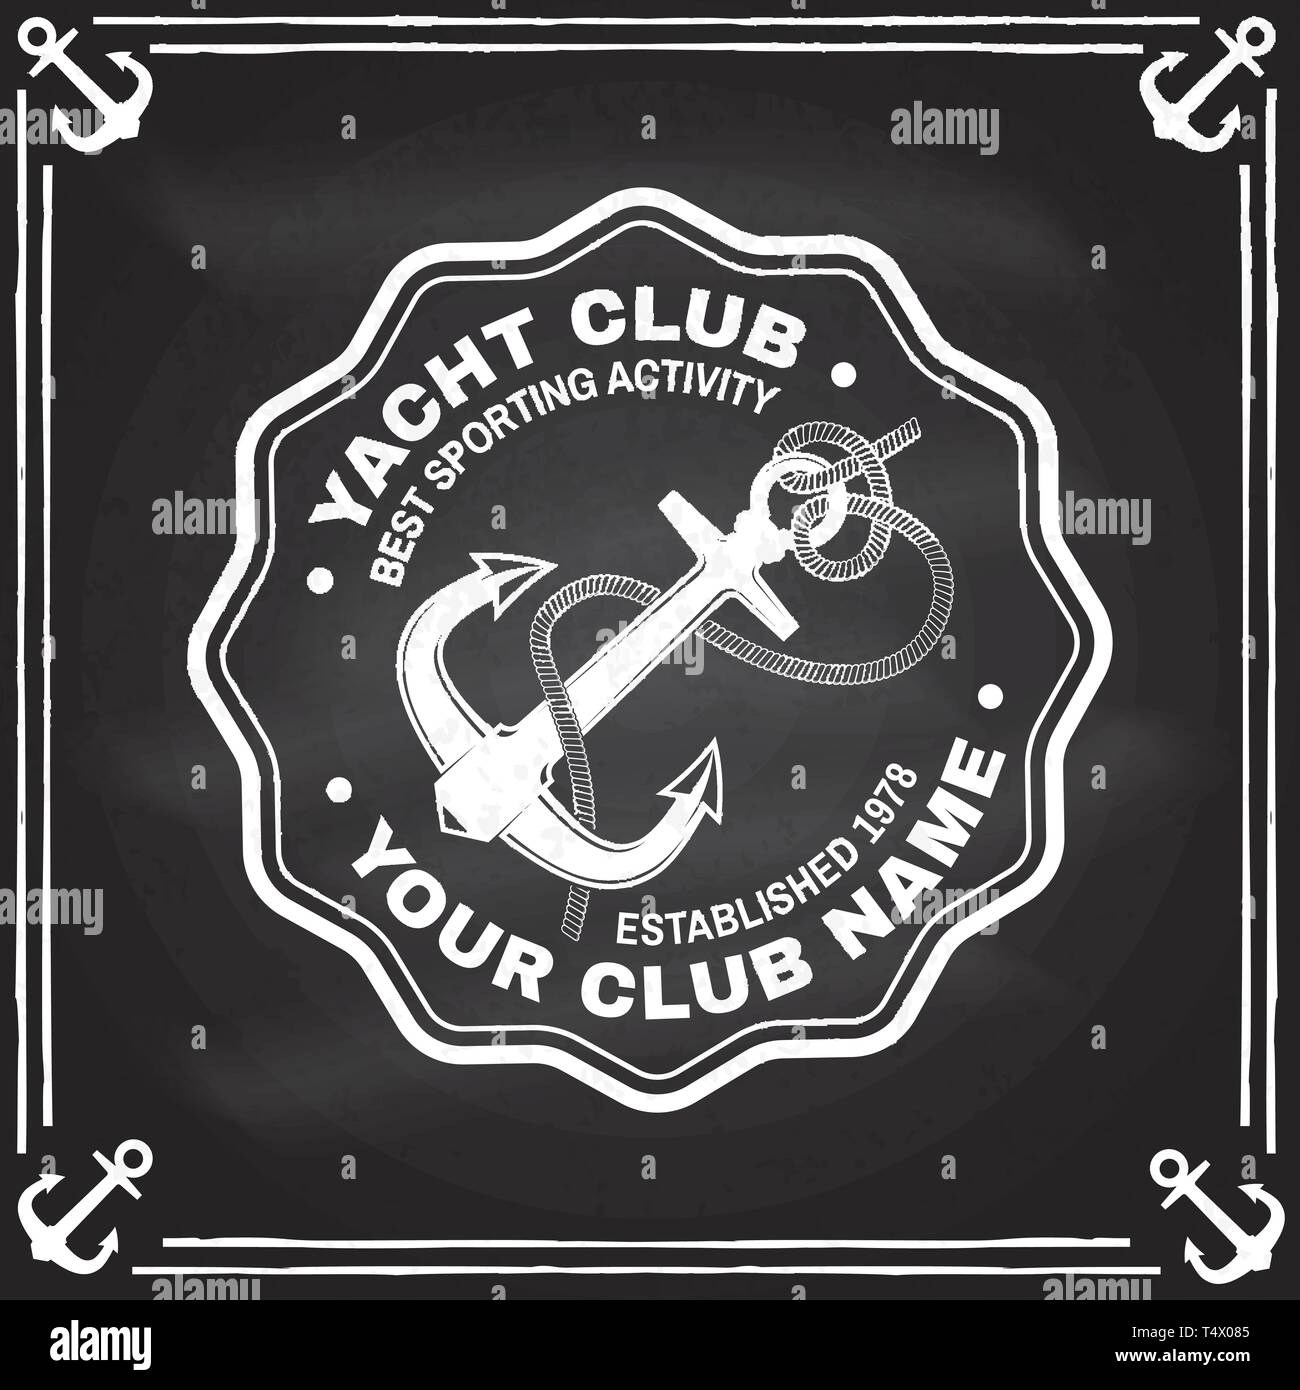 Yacht club badge. Vector illustration on the chalkboard. Concept for shirt, print, stamp or tee. Vintage typography design with black sea anchor and rope knot silhouette. Stock Vector